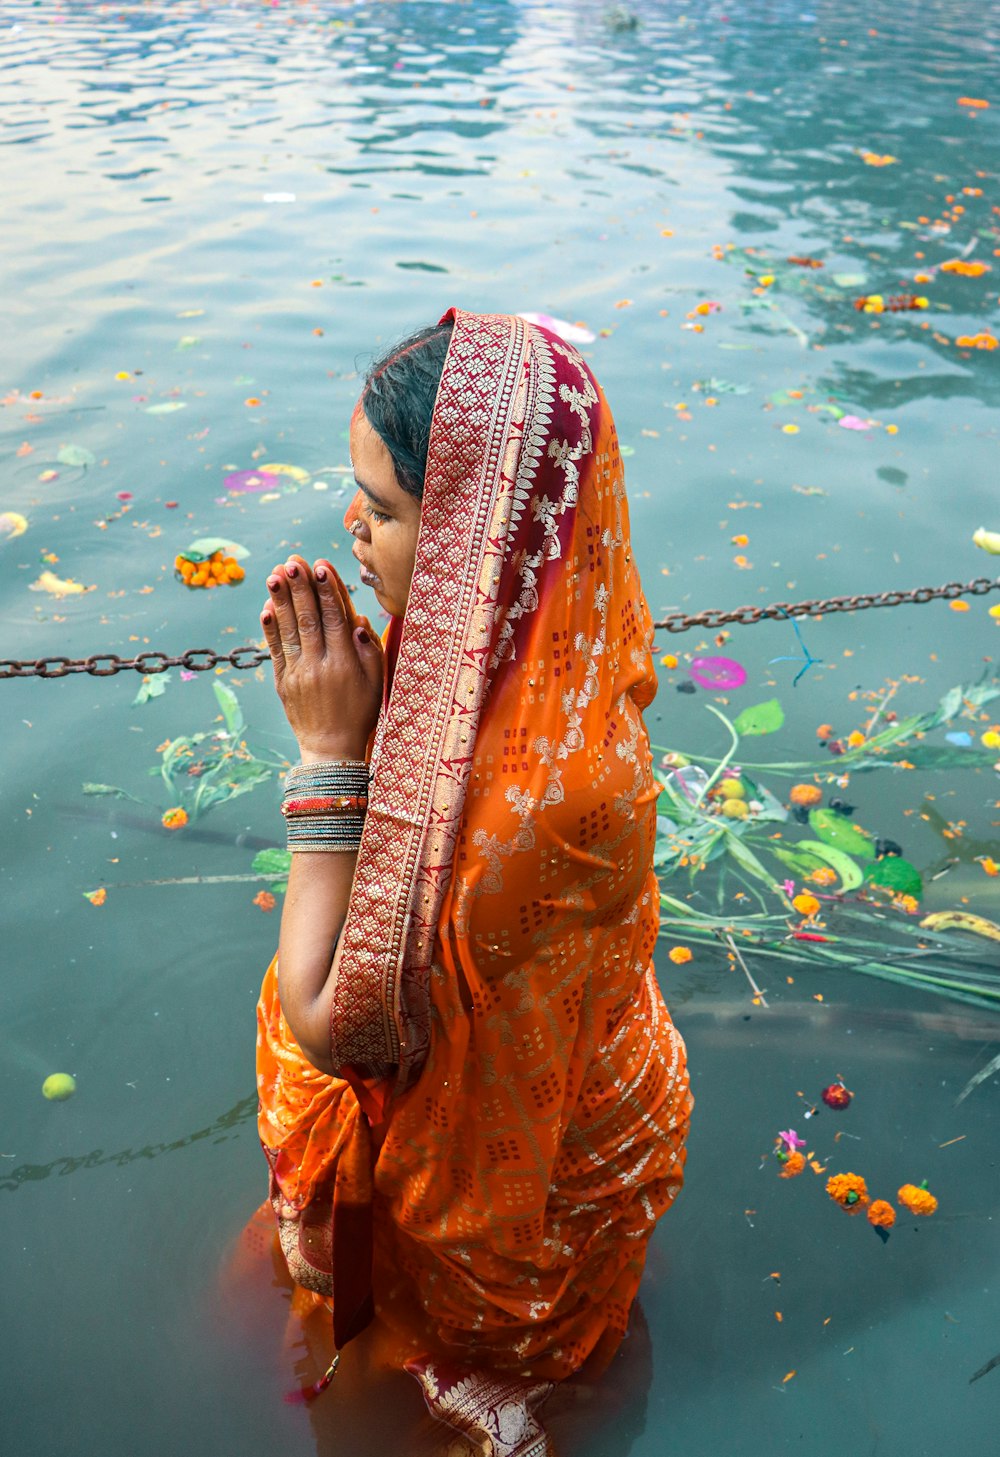 a person in a scarf standing in water